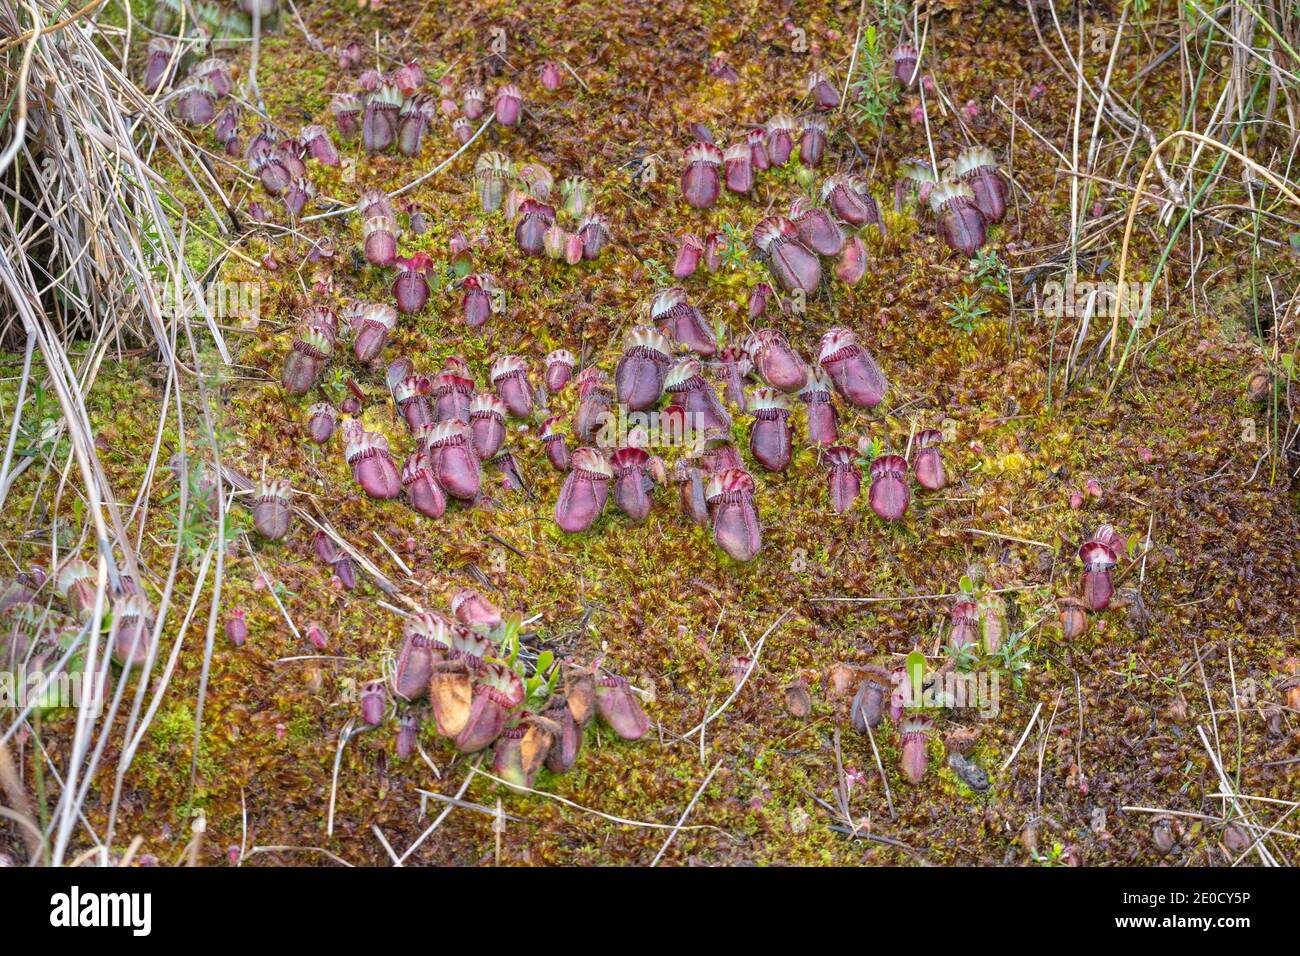 colony of Cephalotus follicularis, the Albany pitcher plant, in natural habitat seen close to Walpole in Western Australia Stock Photo